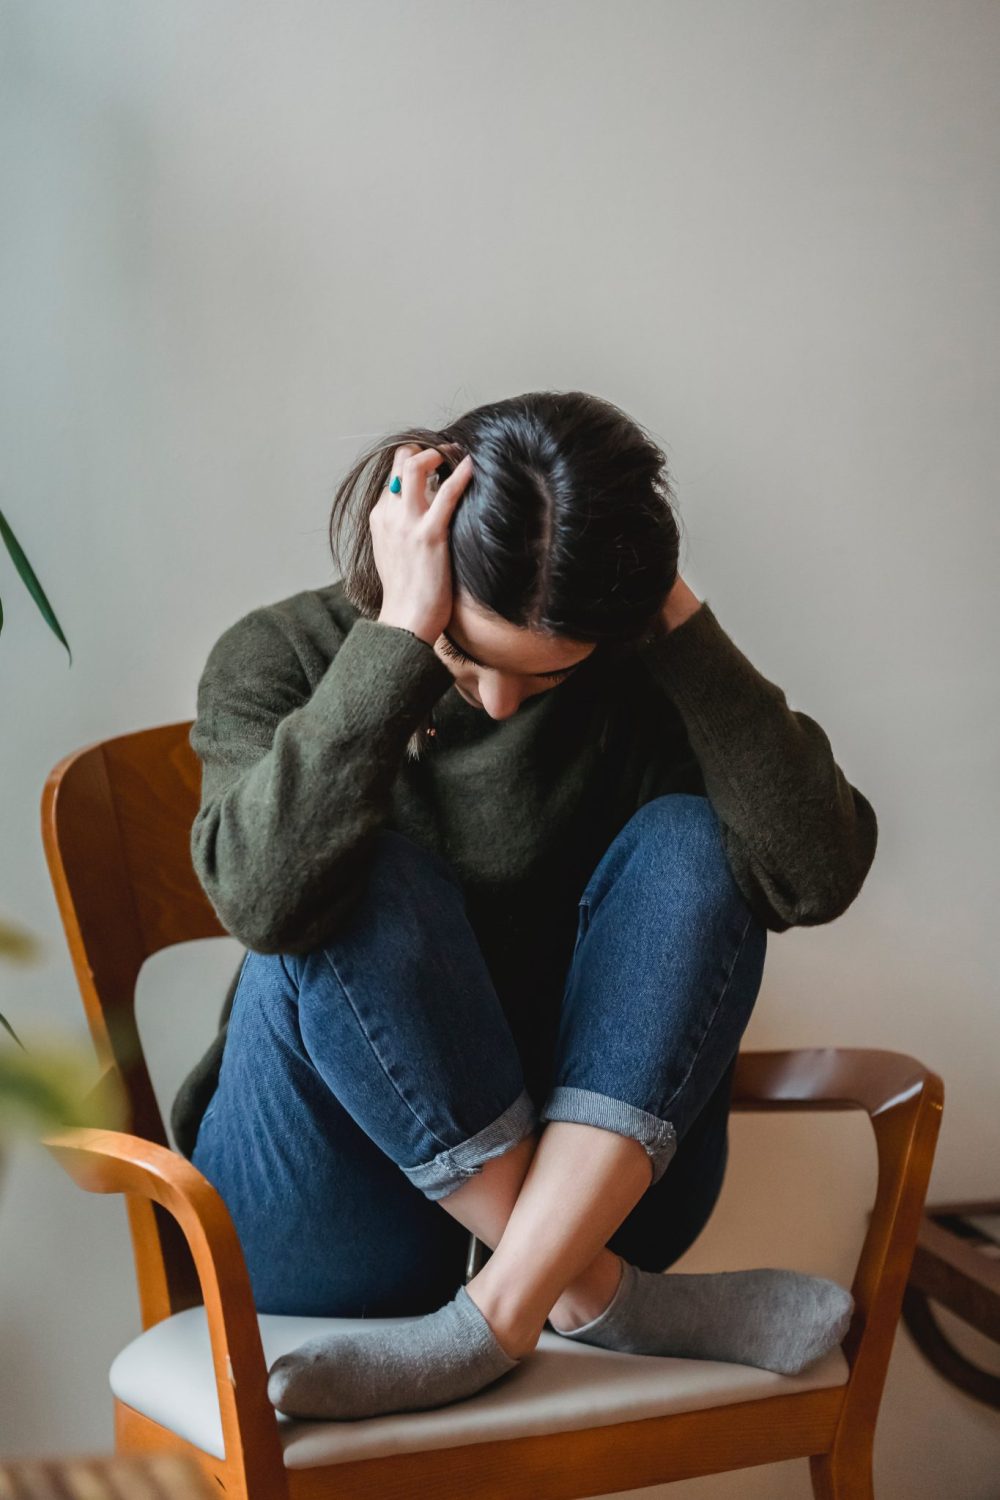 6 Practical Ways to Deal With Grief